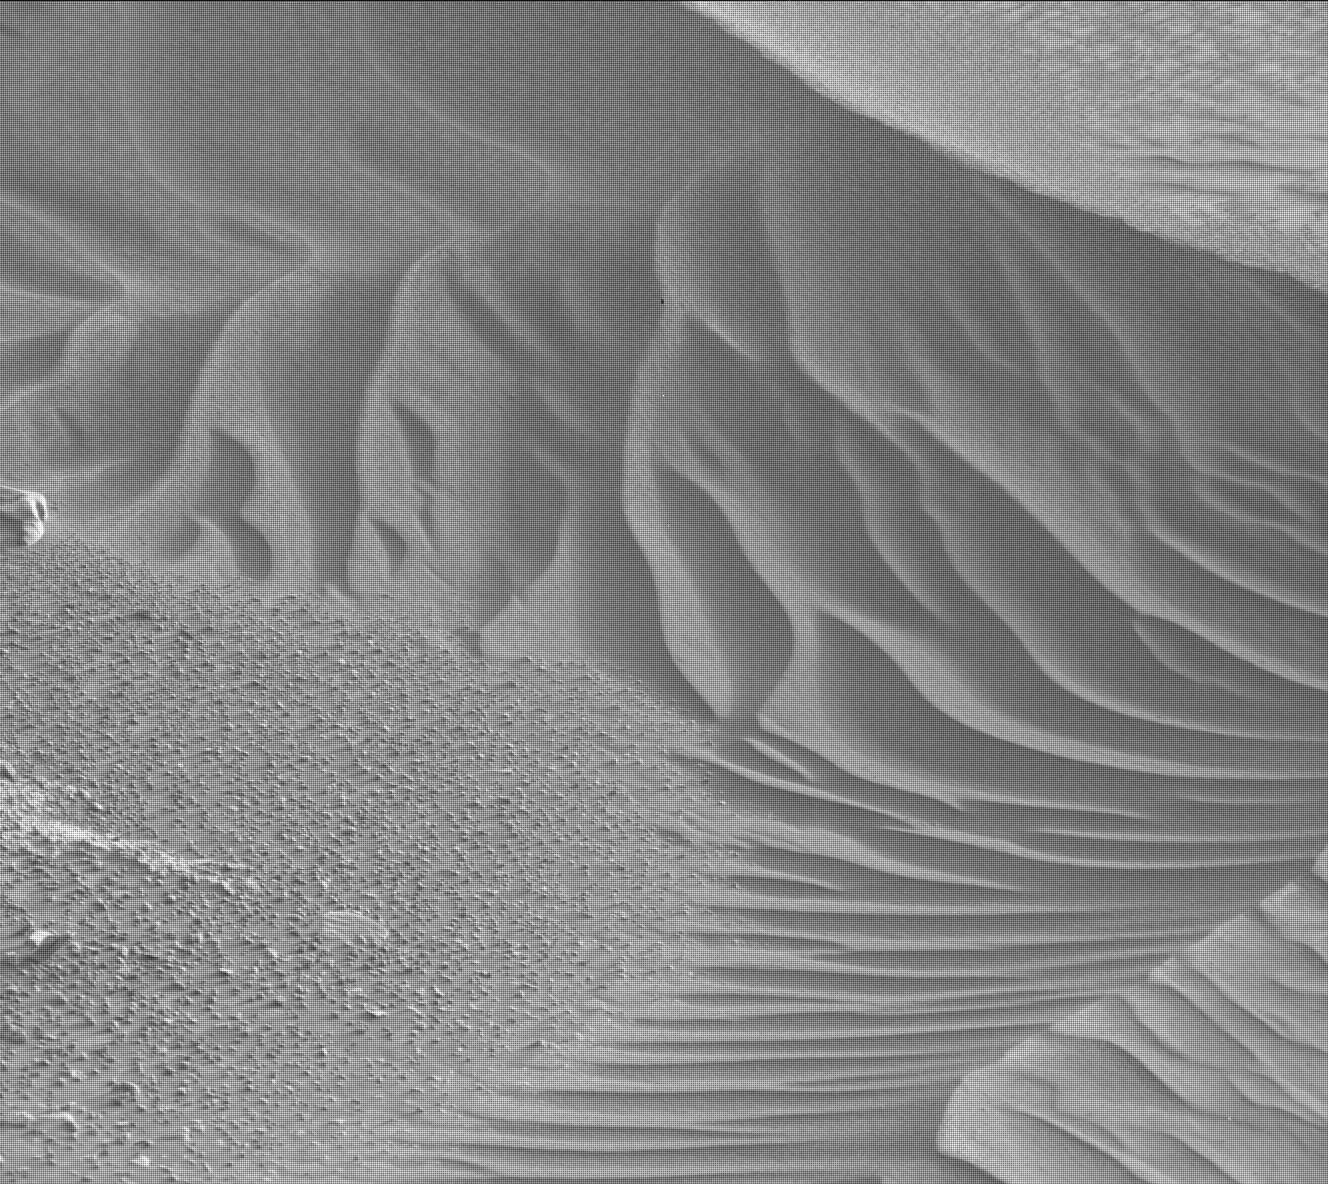 A black and white photo of a Martian landscape, looking cross-hatched as if viewed through a window screen. The terrain at lower left resembles coarse sandpaper, while the other three-quarers of the image frame show undulating dunes, looking like folds in satin fabric.